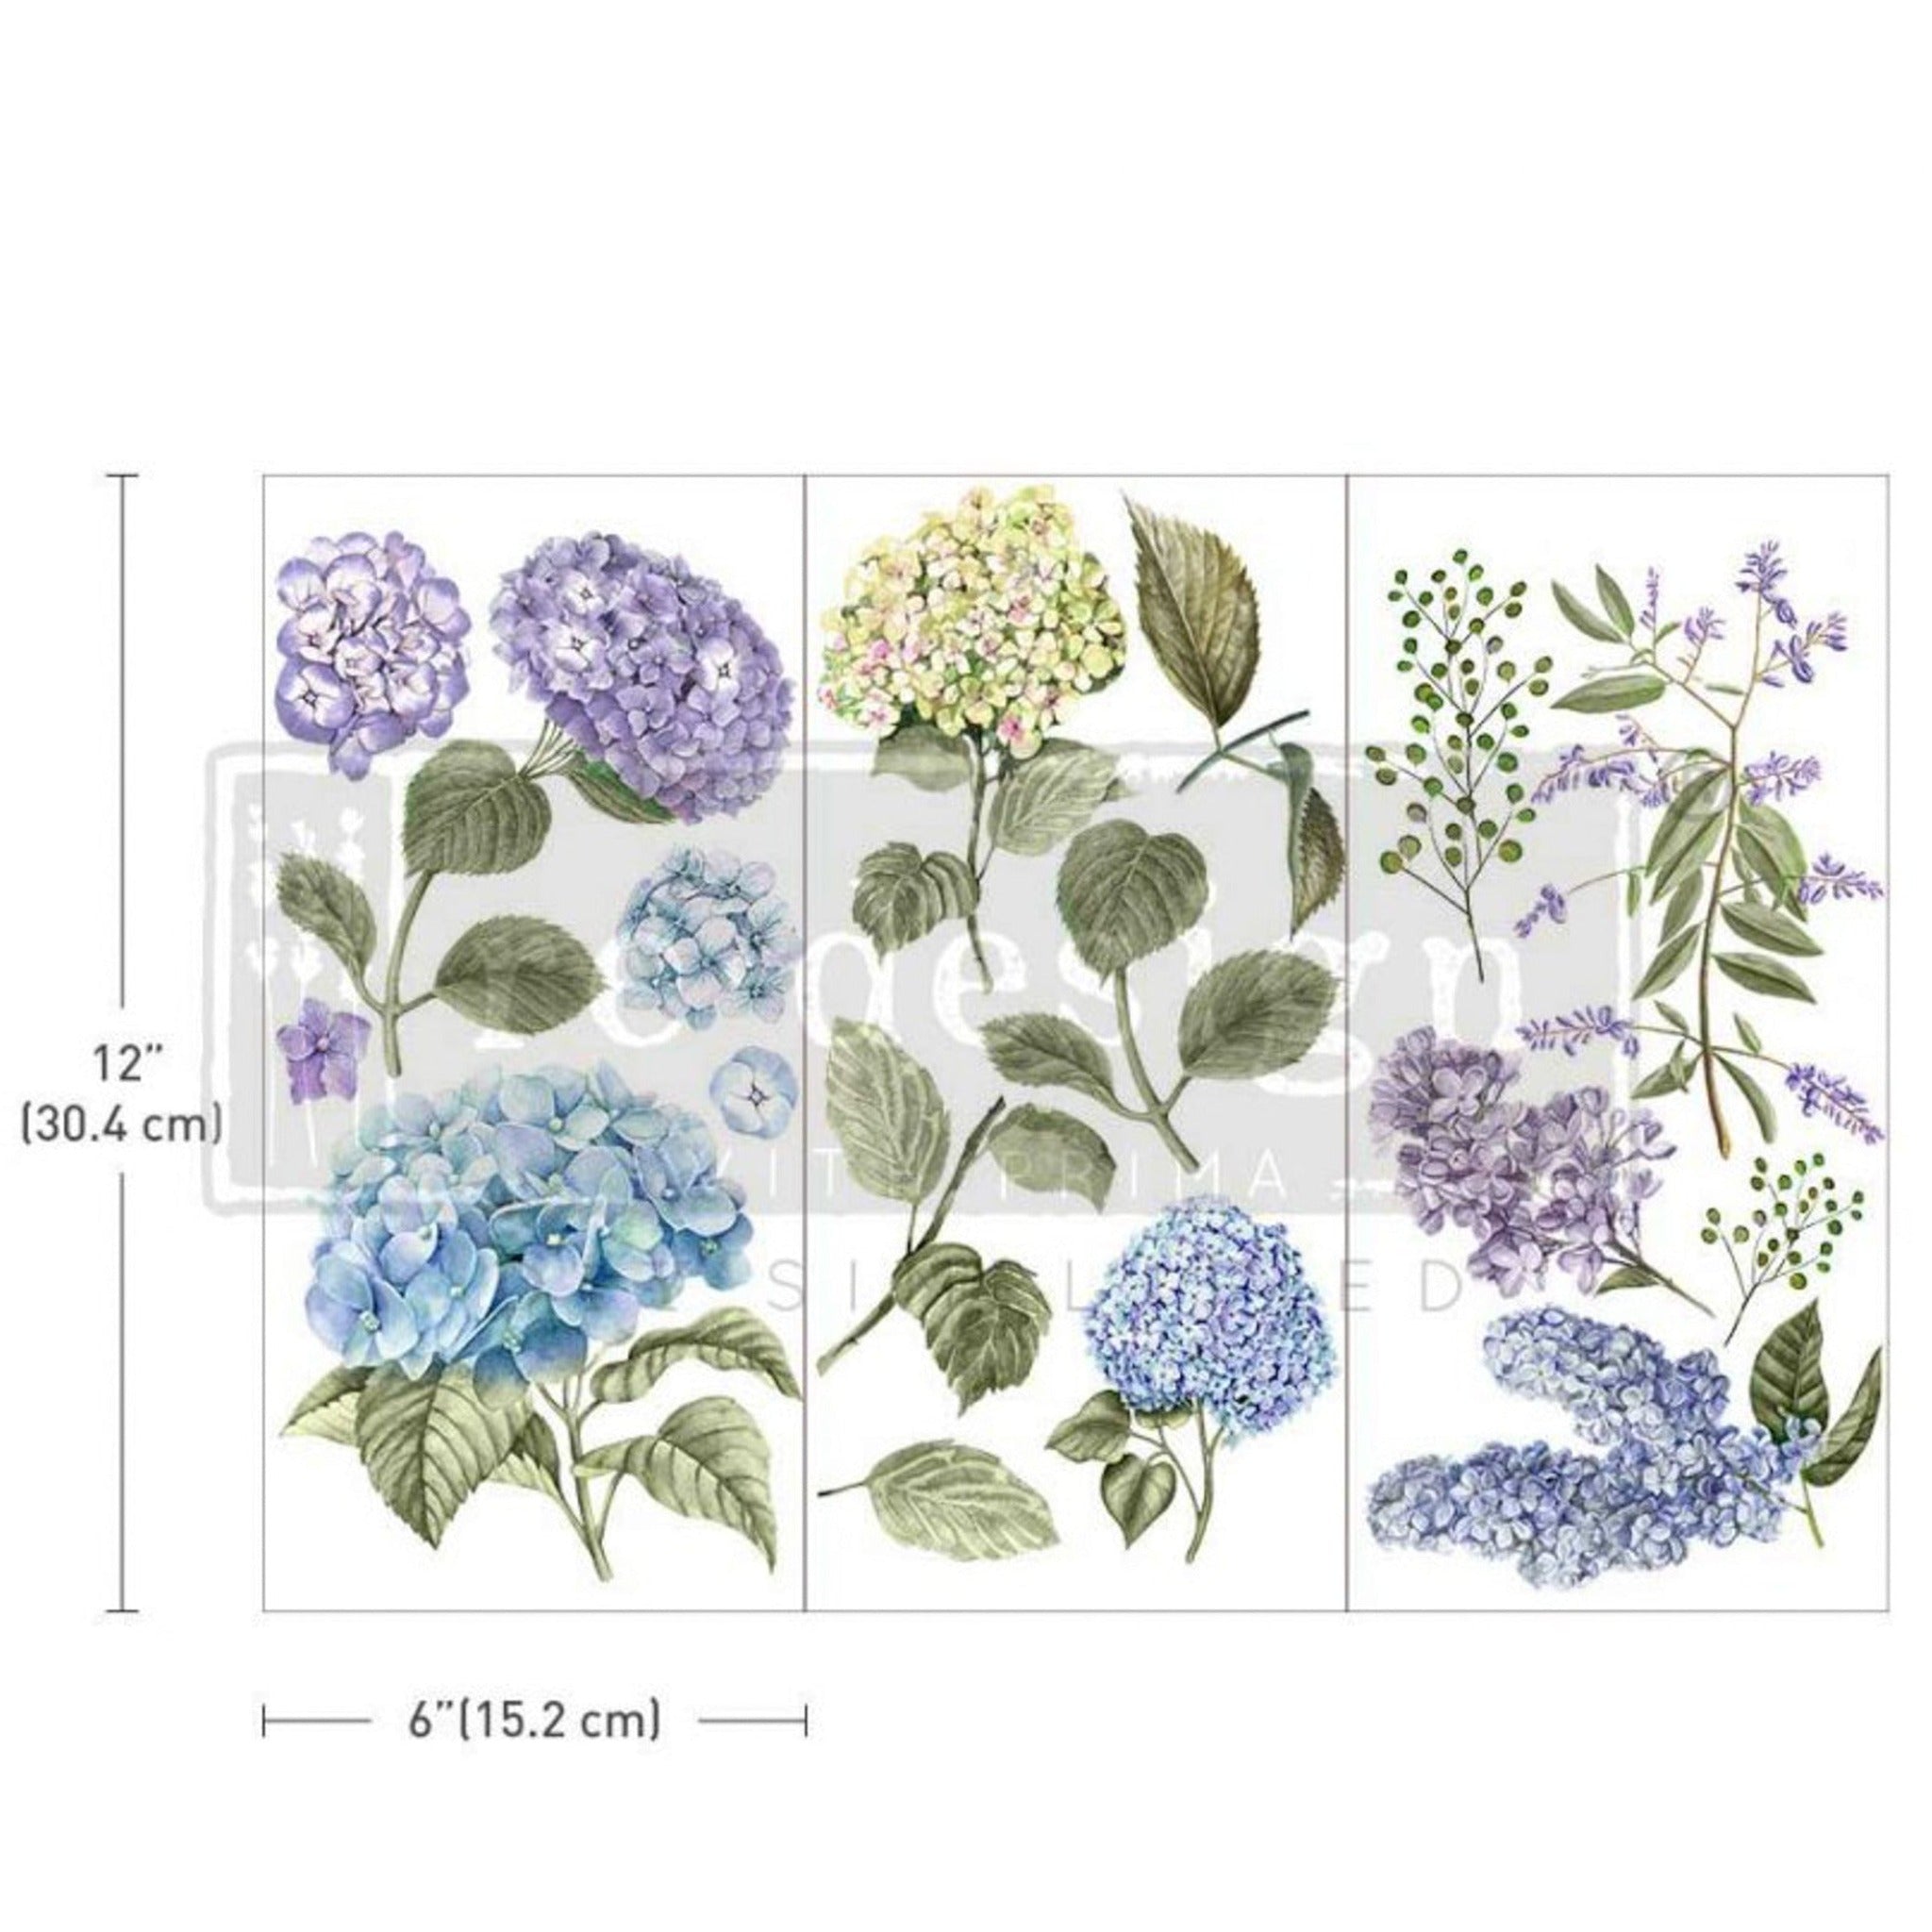 Three sheets of ReDesign with Prima's Mystic Hydrangeas small transfer are on a white background. Measurements for 1 sheet reads: 12" [30.4 cm] by 6" [15.2 cm].